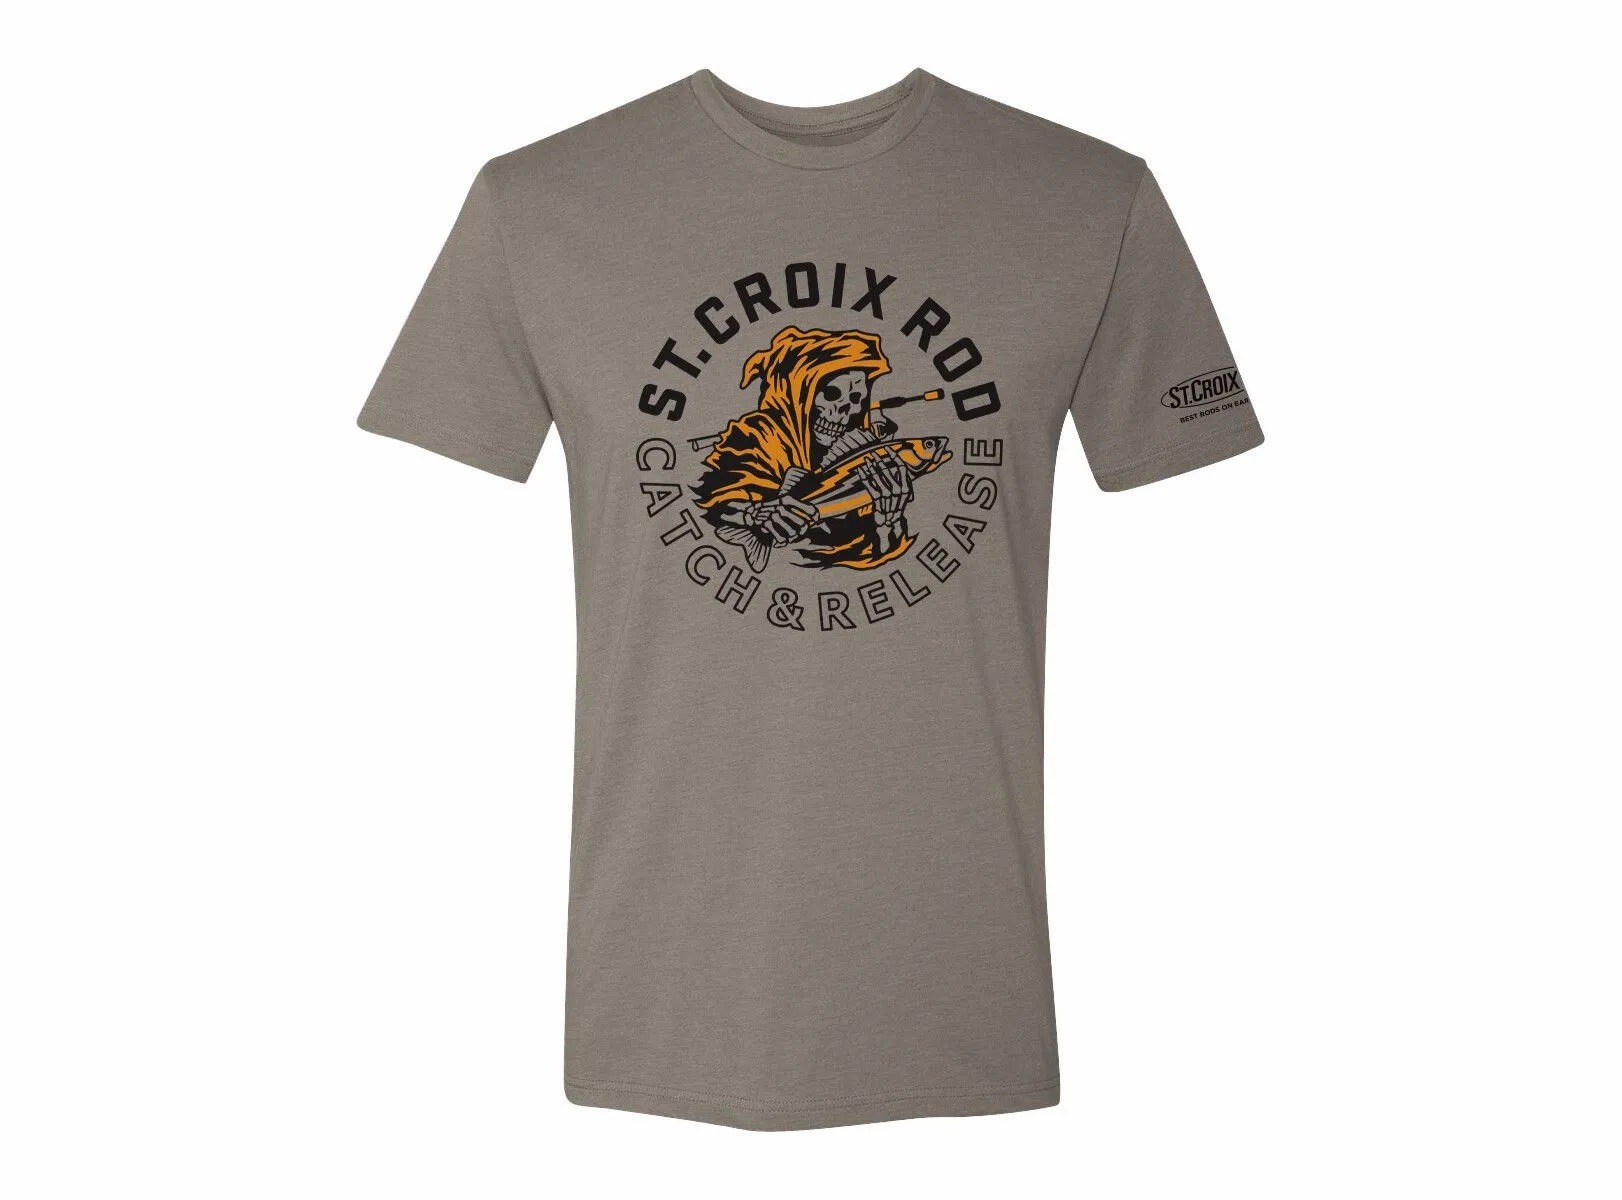 St. Croix – T-Shirt Catch and Release Tee